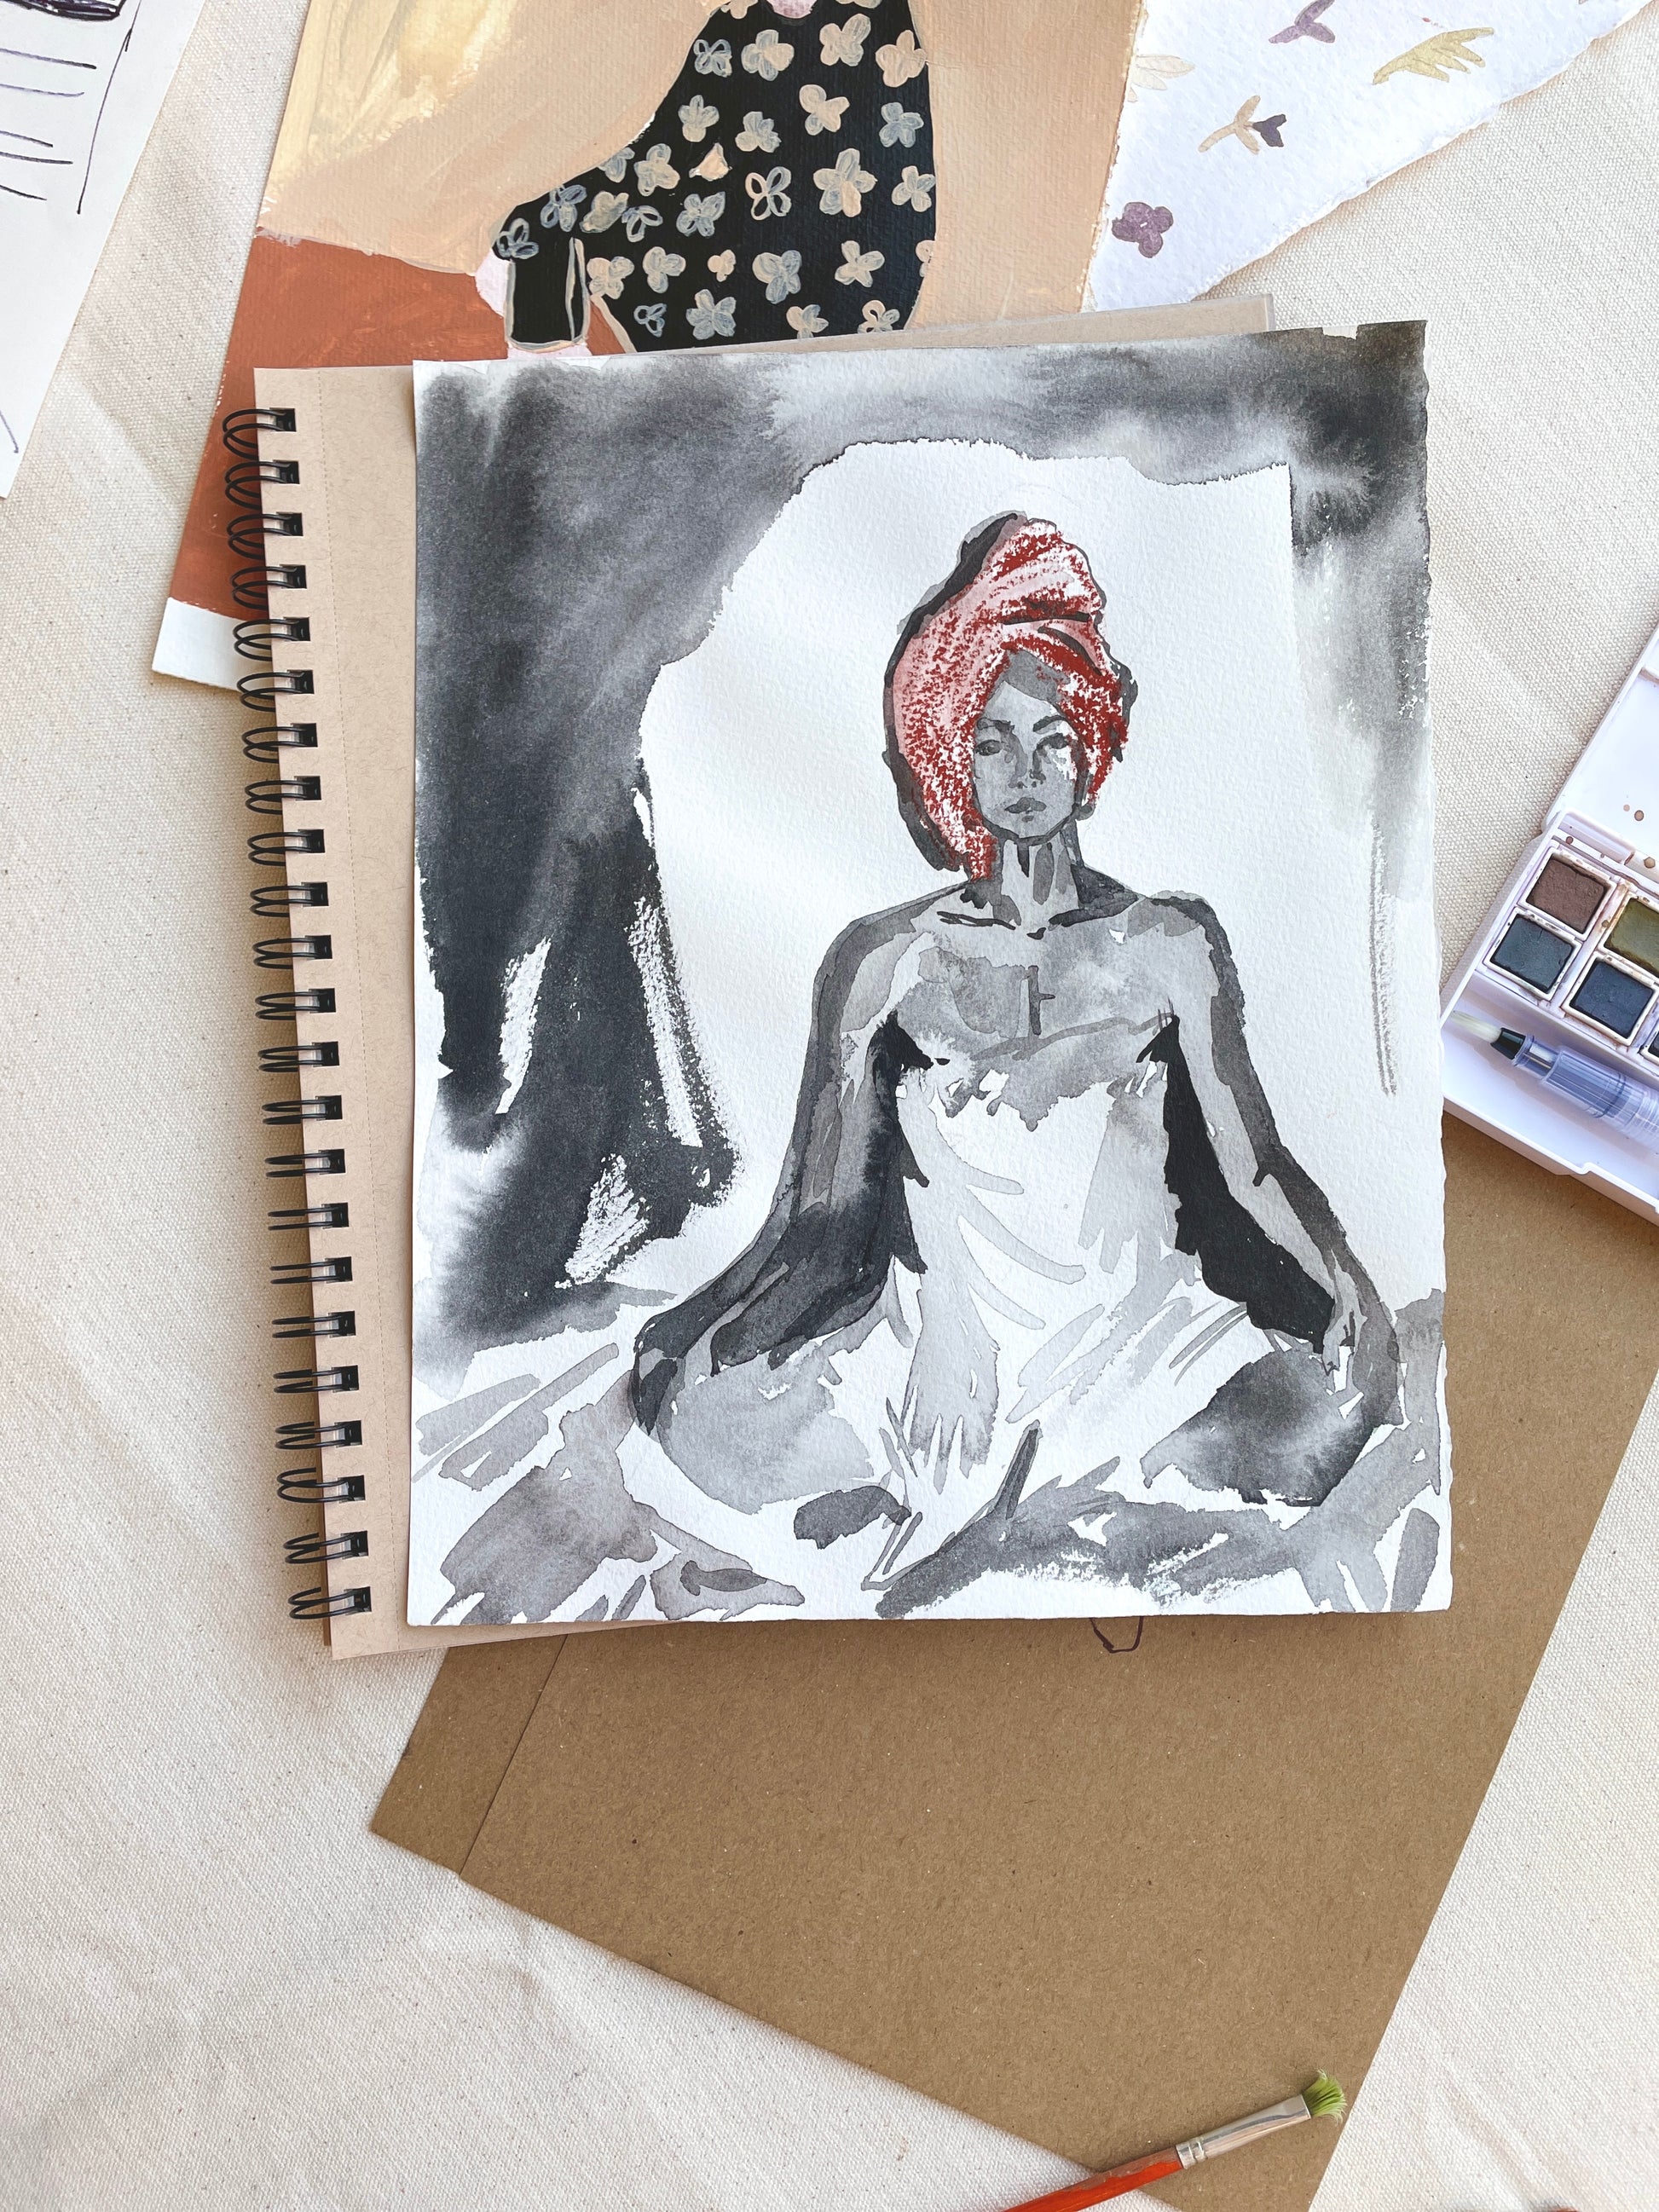 Watercolor mixed media art piece of woman wrapped in towel after shower or bath